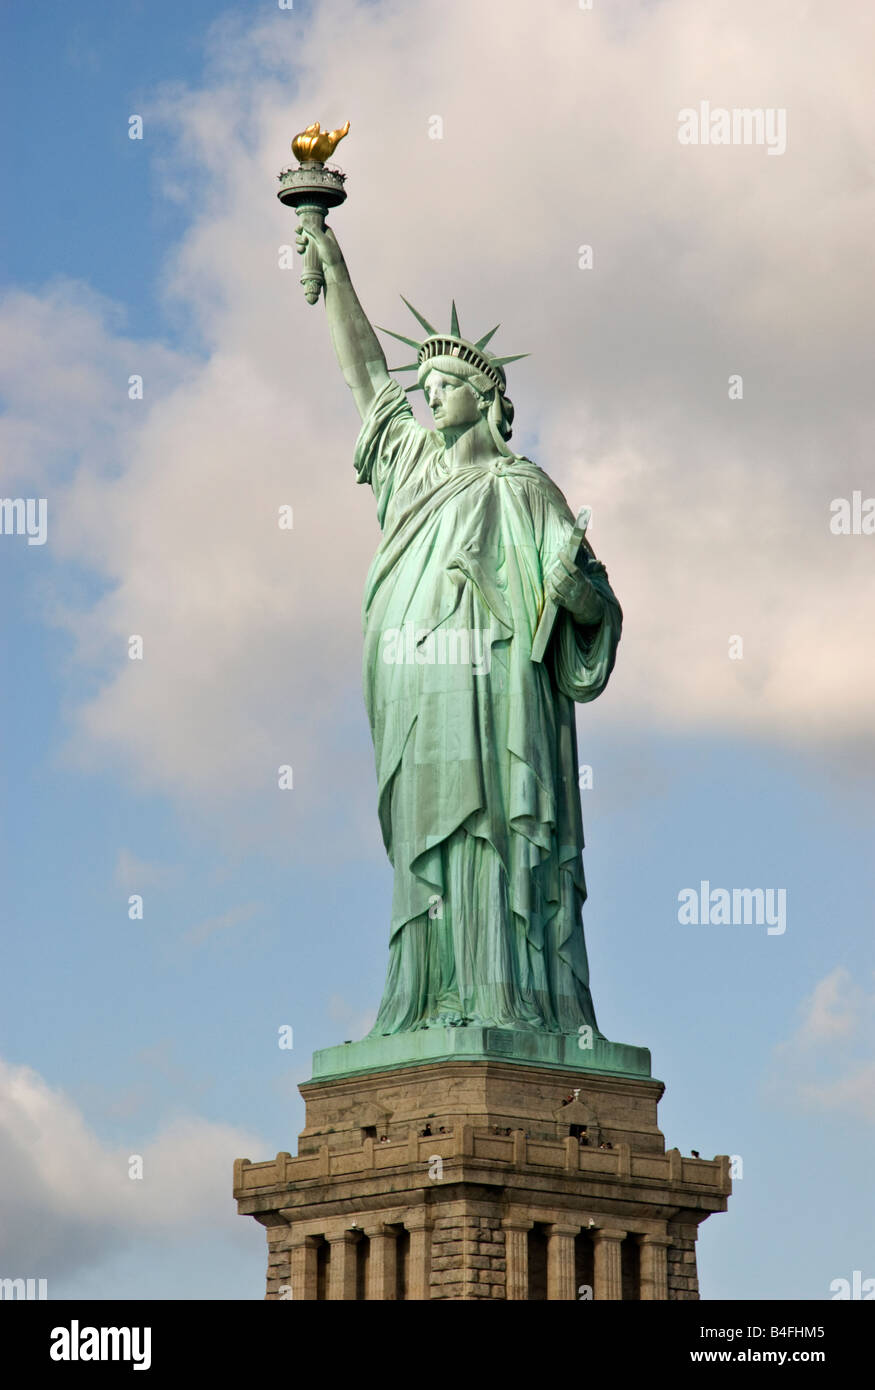 Statue of Liberty on Ellis Island, New York City, New York. Color daytime  landscape photo, statue is in center of frame, ample copy space in sky  Stock Photo - Alamy